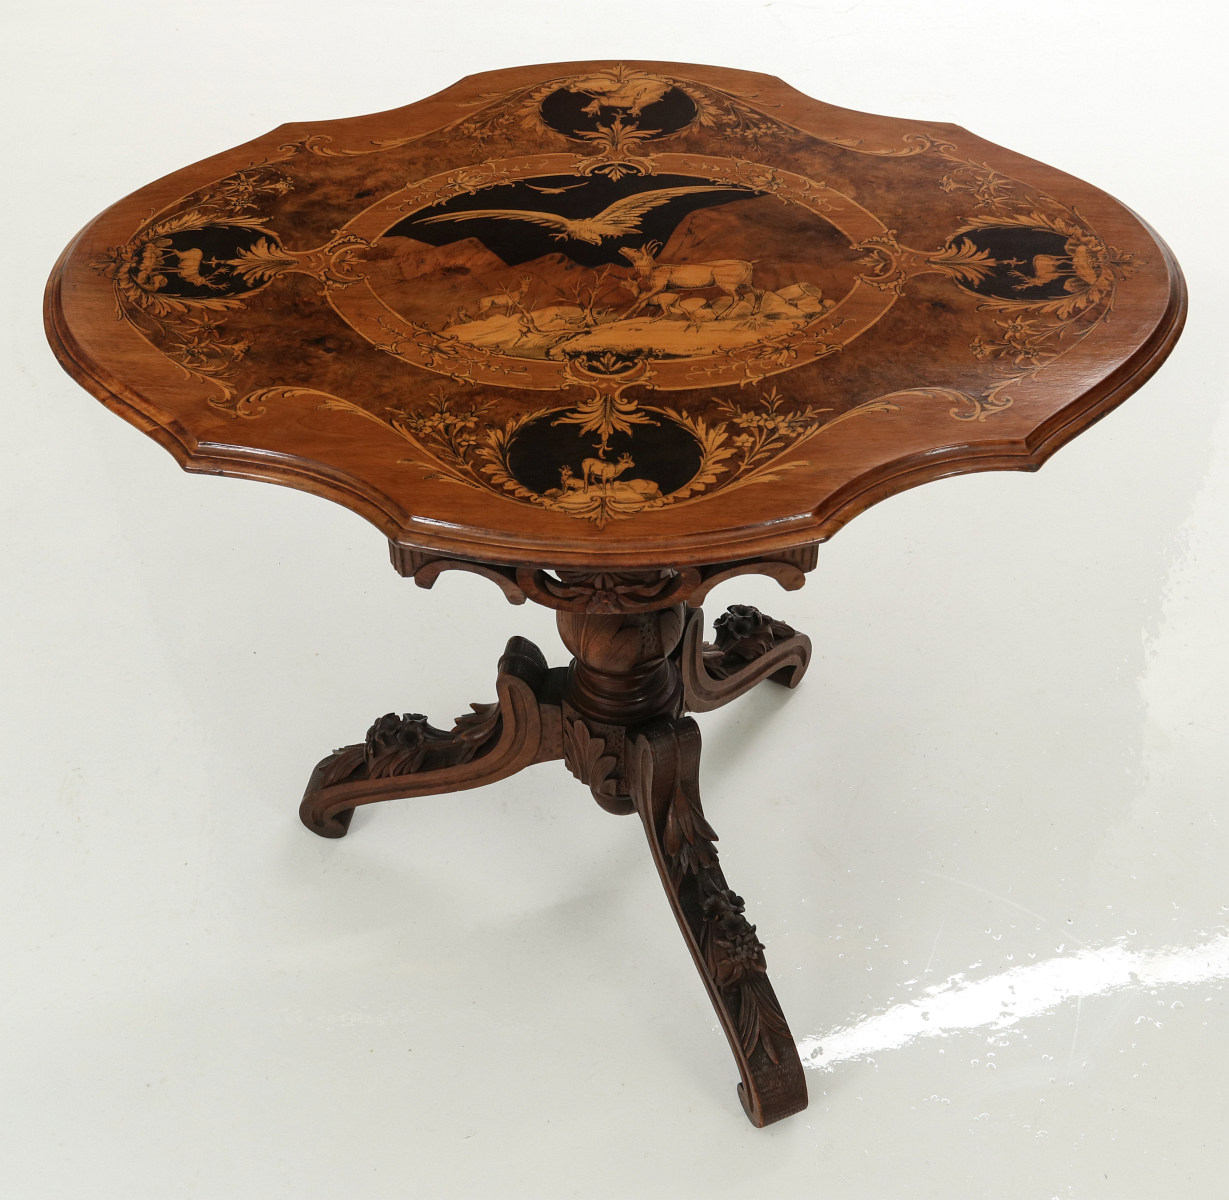 A 19TH CENT. CONTINENTAL ELABORATELY INLAID TABLE